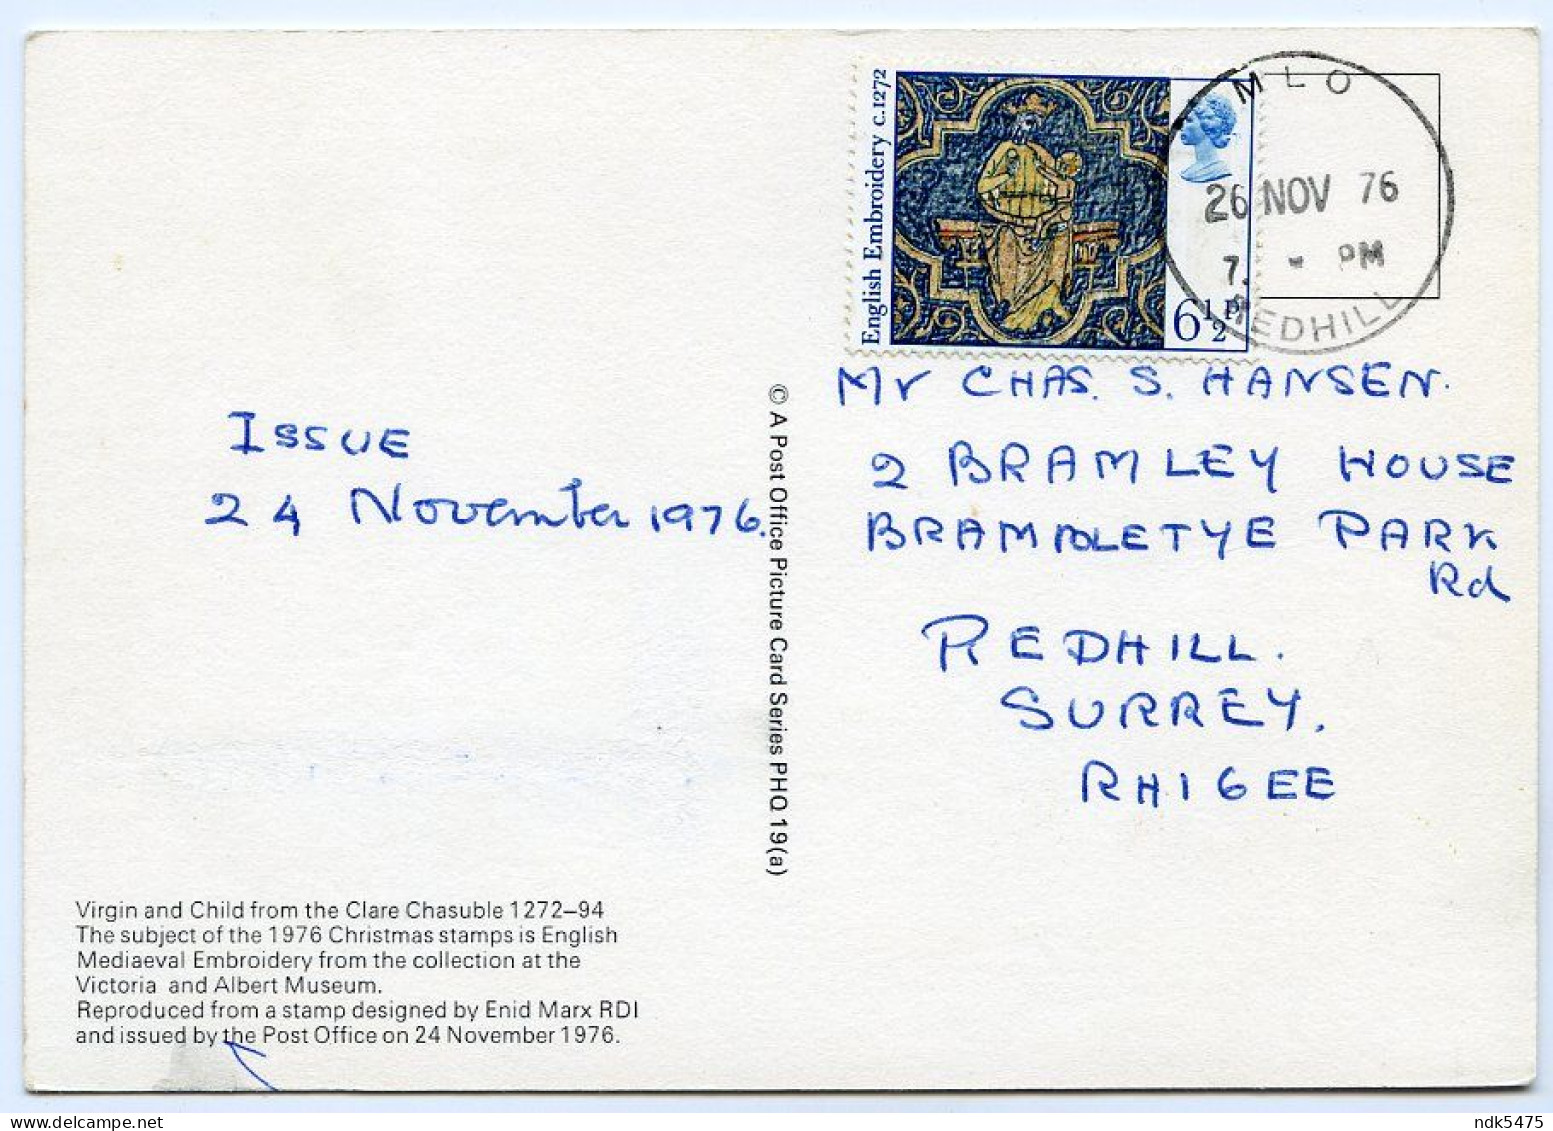 POSTMARK : MLO REDHILL, 1976 / VICTORIA AND ALBERT MUSEUM PHQ - VIRGIN AND CHILD  (10 X 15cms Approx.) - PHQ Cards